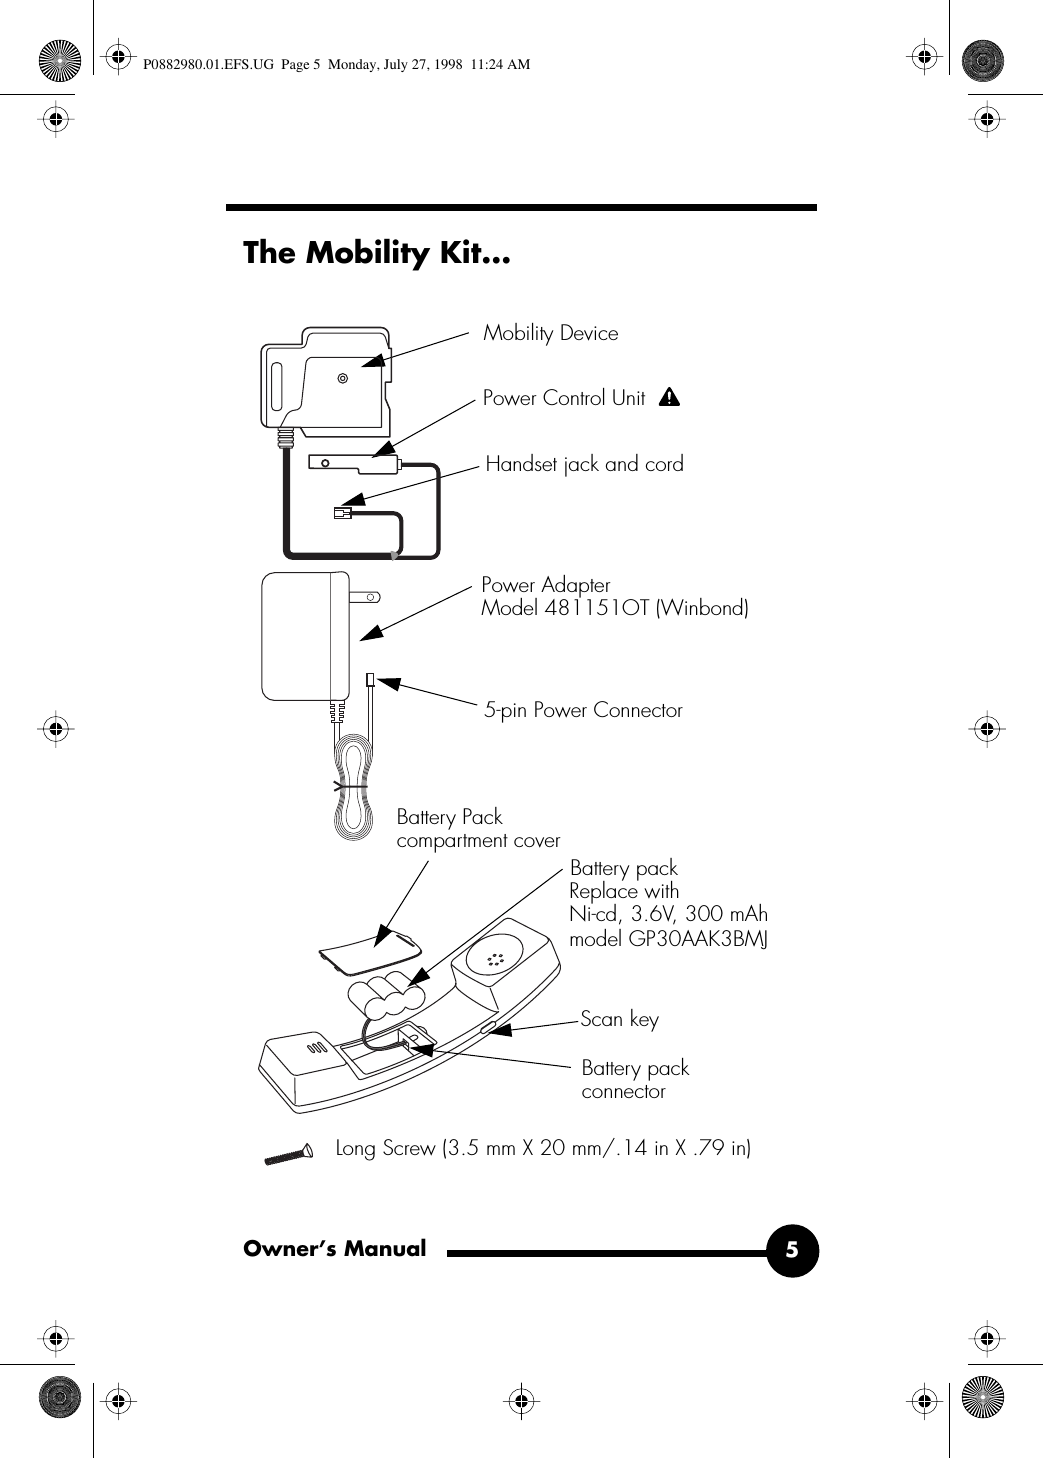  Owner’s Manual 5 The Mobility Kit...Mobility DevicePower Control Unit Handset jack and cord5-pin Power ConnectorBattery Pack Battery packBattery packScan keyconnectorPower AdapterReplace with Ni-cd, 3.6V, 300 mAh compartment covermodel GP30AAK3BMJModel 481151OT (Winbond)Long Screw (3.5 mm X 20 mm/.14 in X .79 in) P0882980.01.EFS.UG  Page 5  Monday, July 27, 1998  11:24 AM